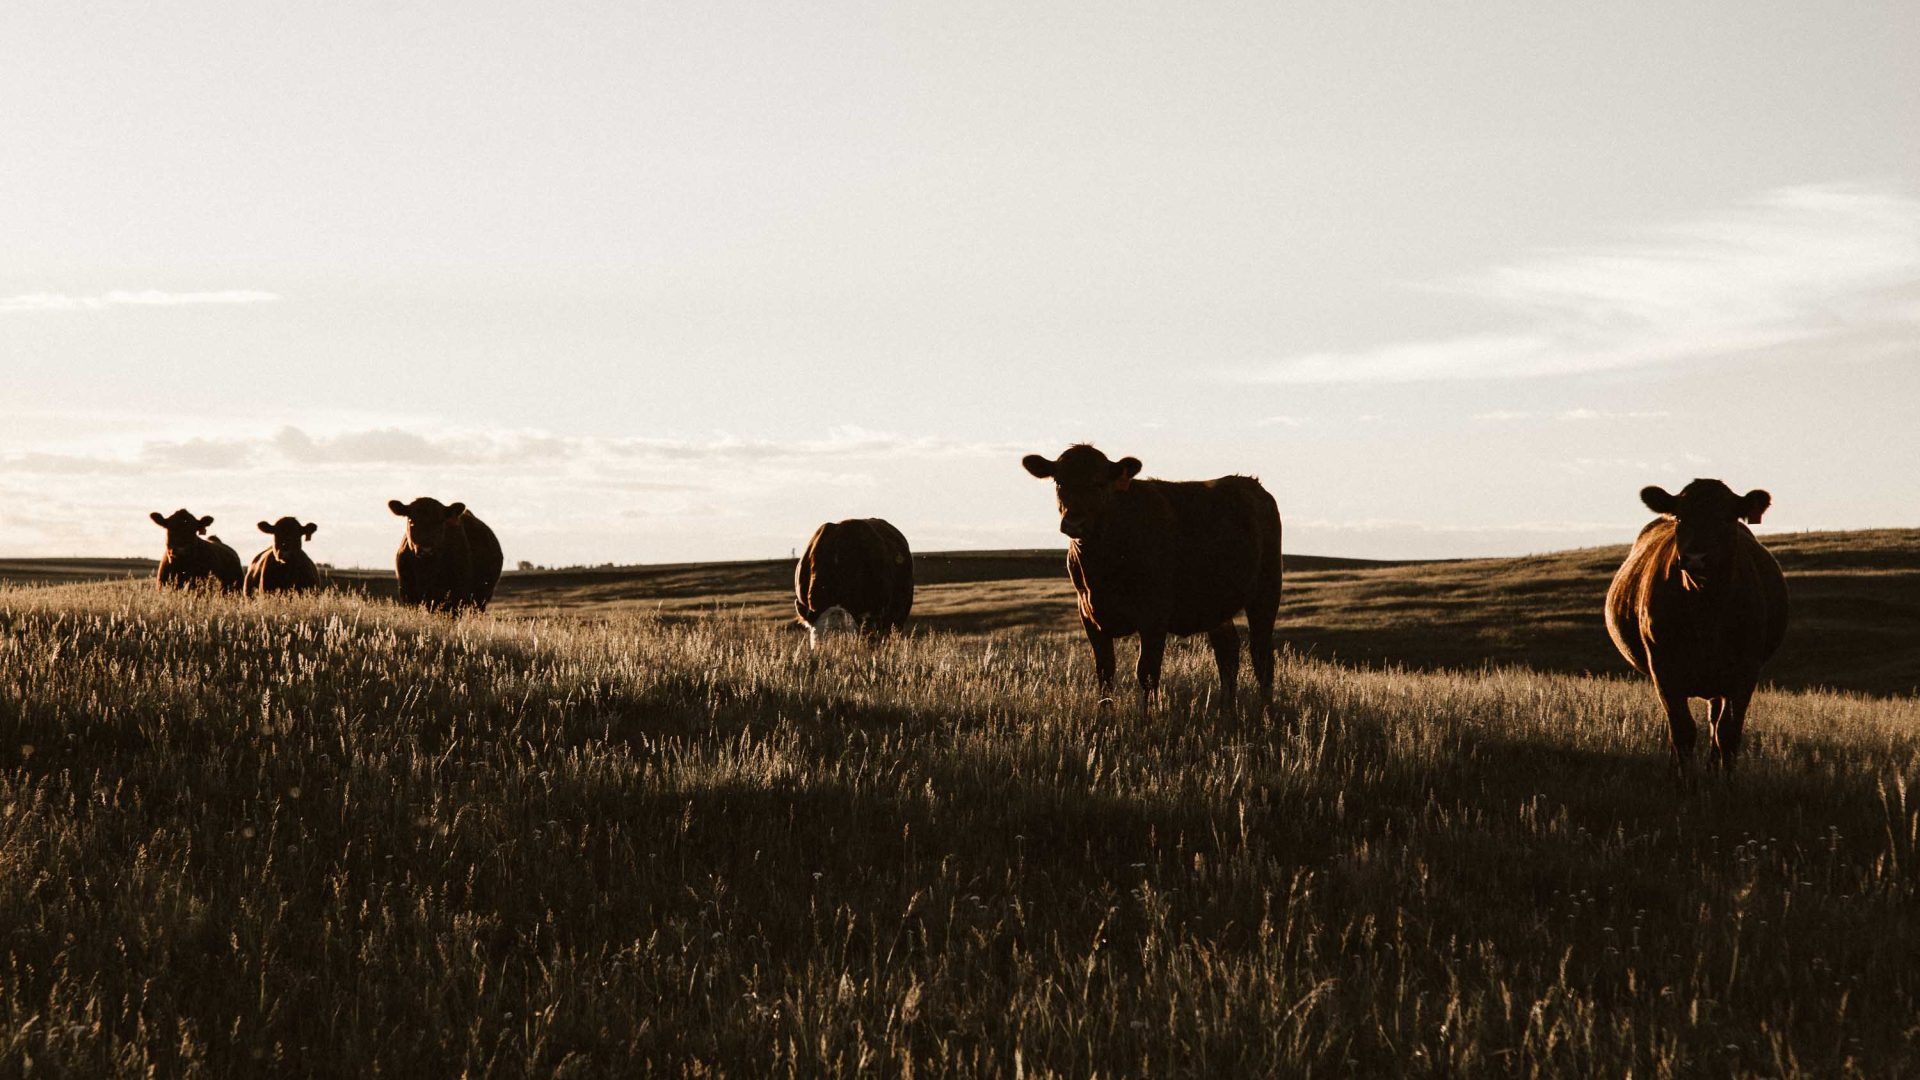 Cows on a grassy hill in low light.